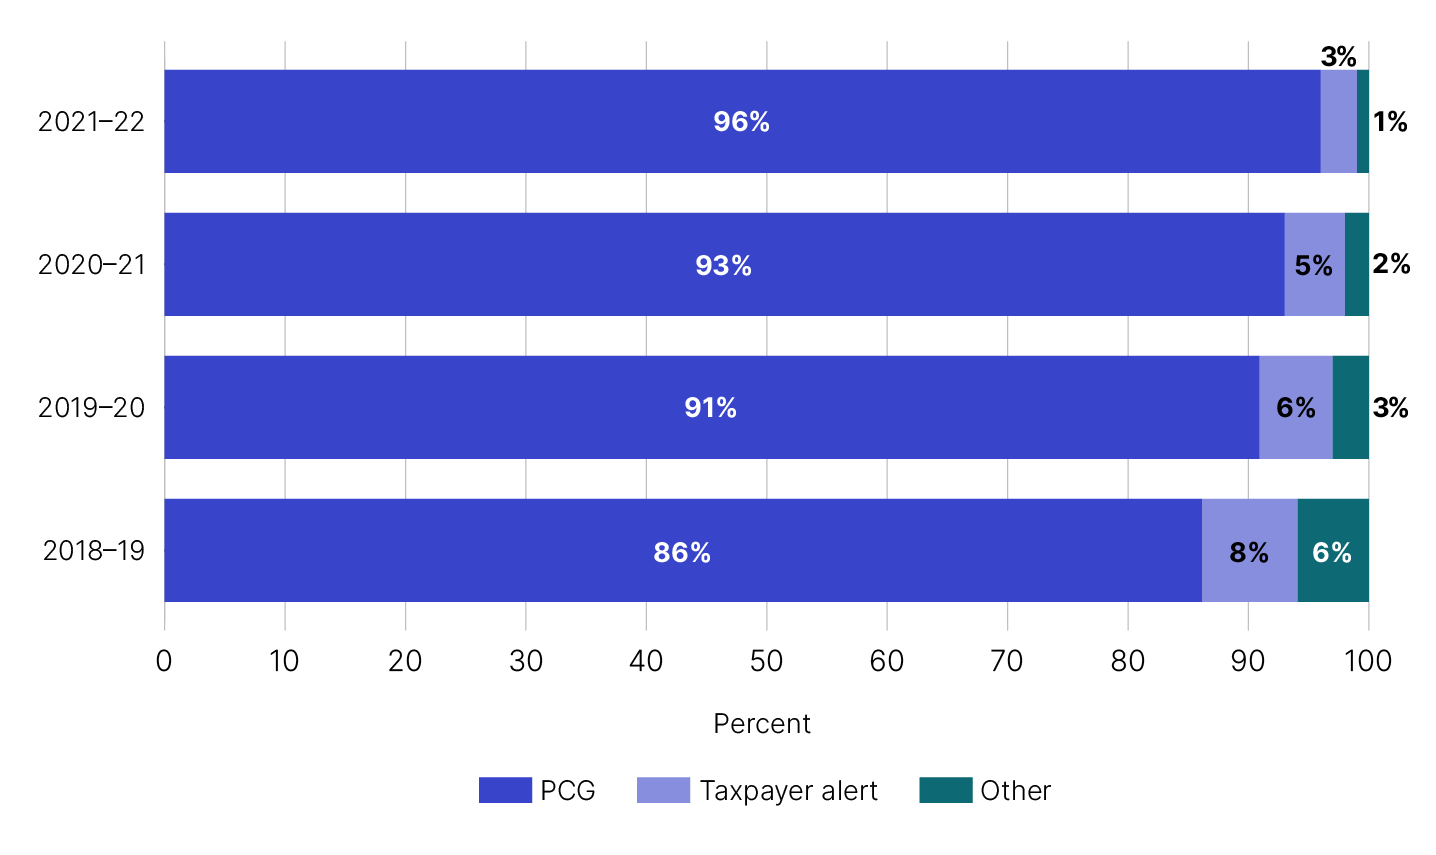 Proportion of disclosures by public advice and guidance product for the 2021-22 income year: 96% PCG, 3% Taxpayer alert, 1% Other.